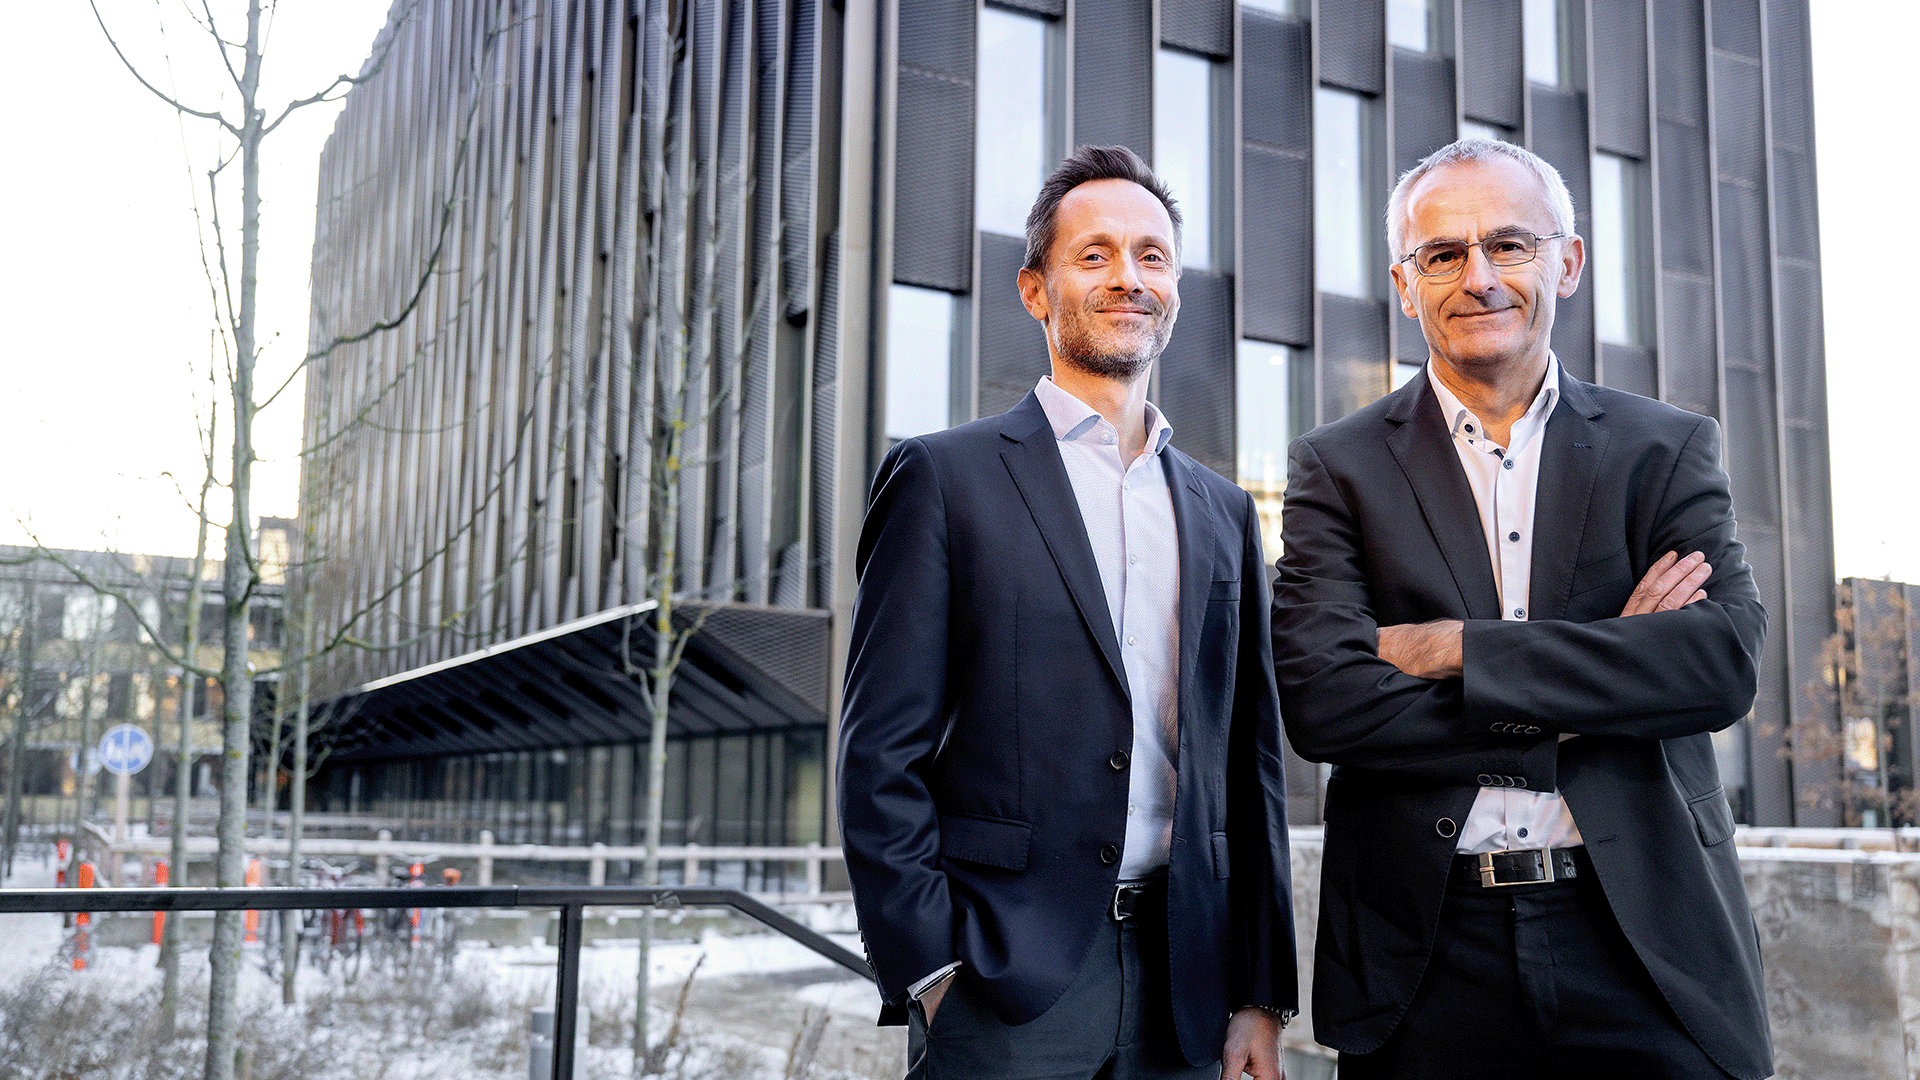 Tejs Vegge and Frede Blaagaard in front of a building similar to the future ‘Climate Challenge Laboratory’